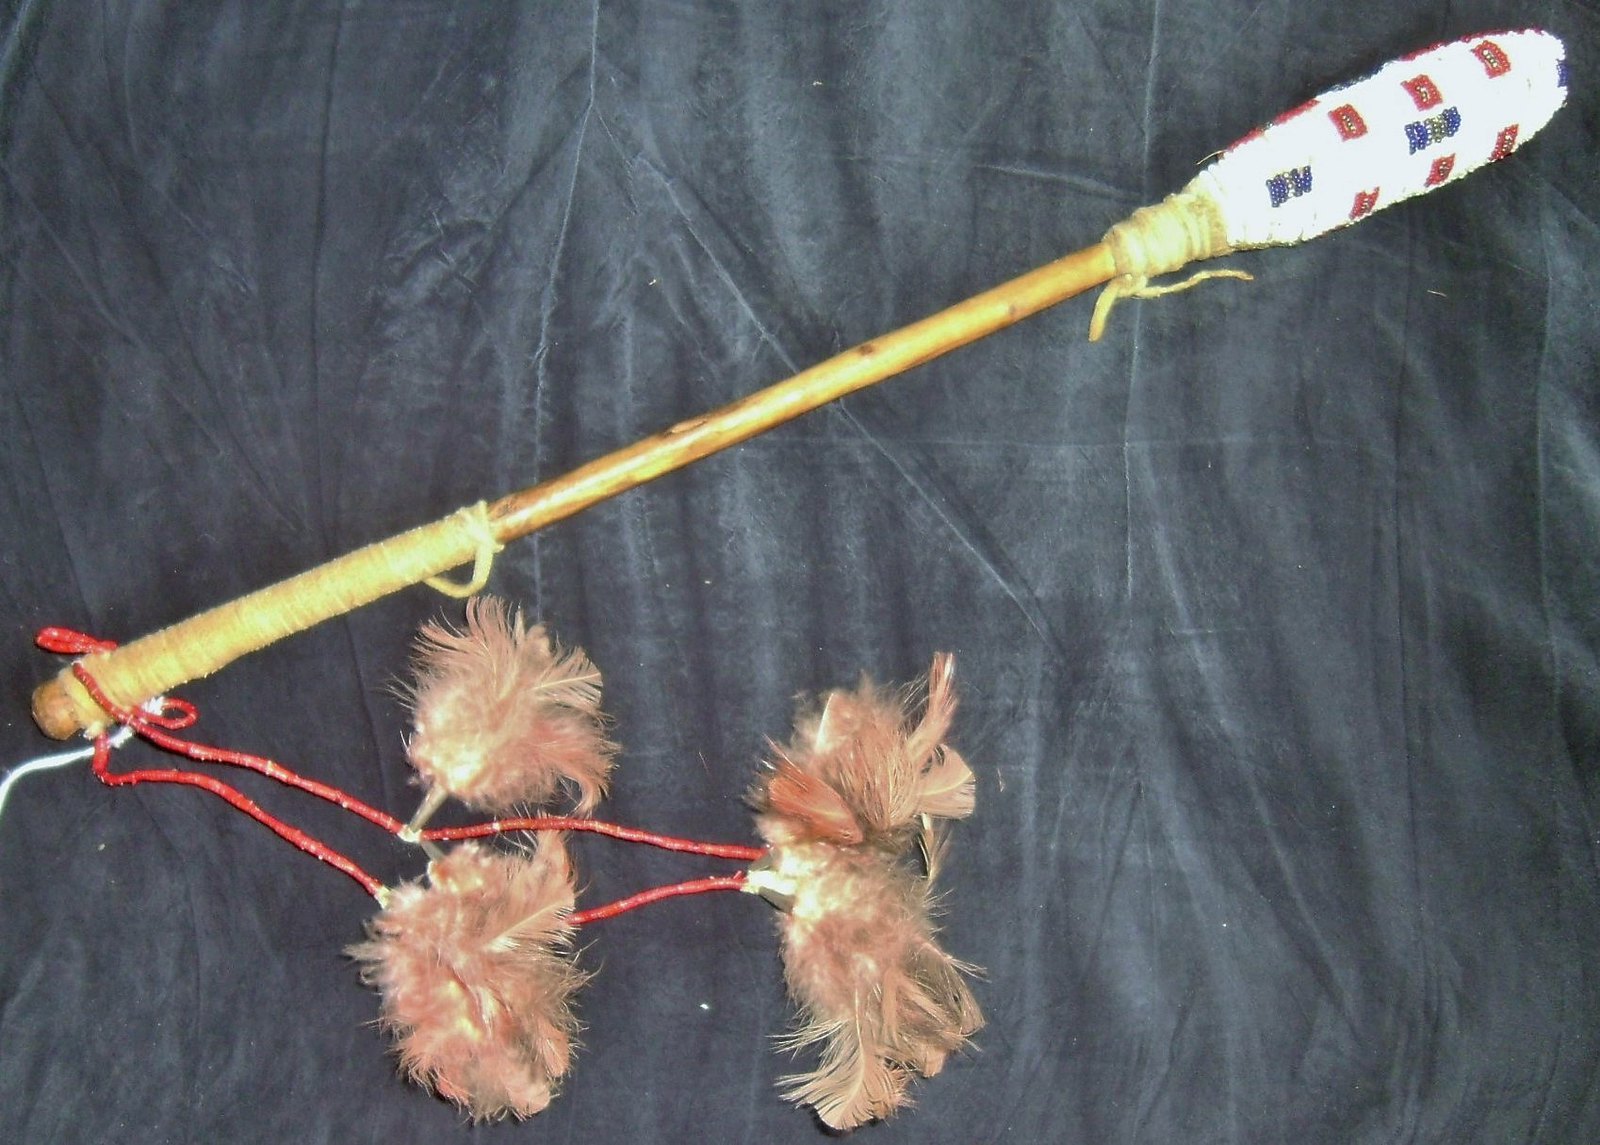 032 Drum beater beaded drum beater with quilled drop 28" long (includes quill drops)